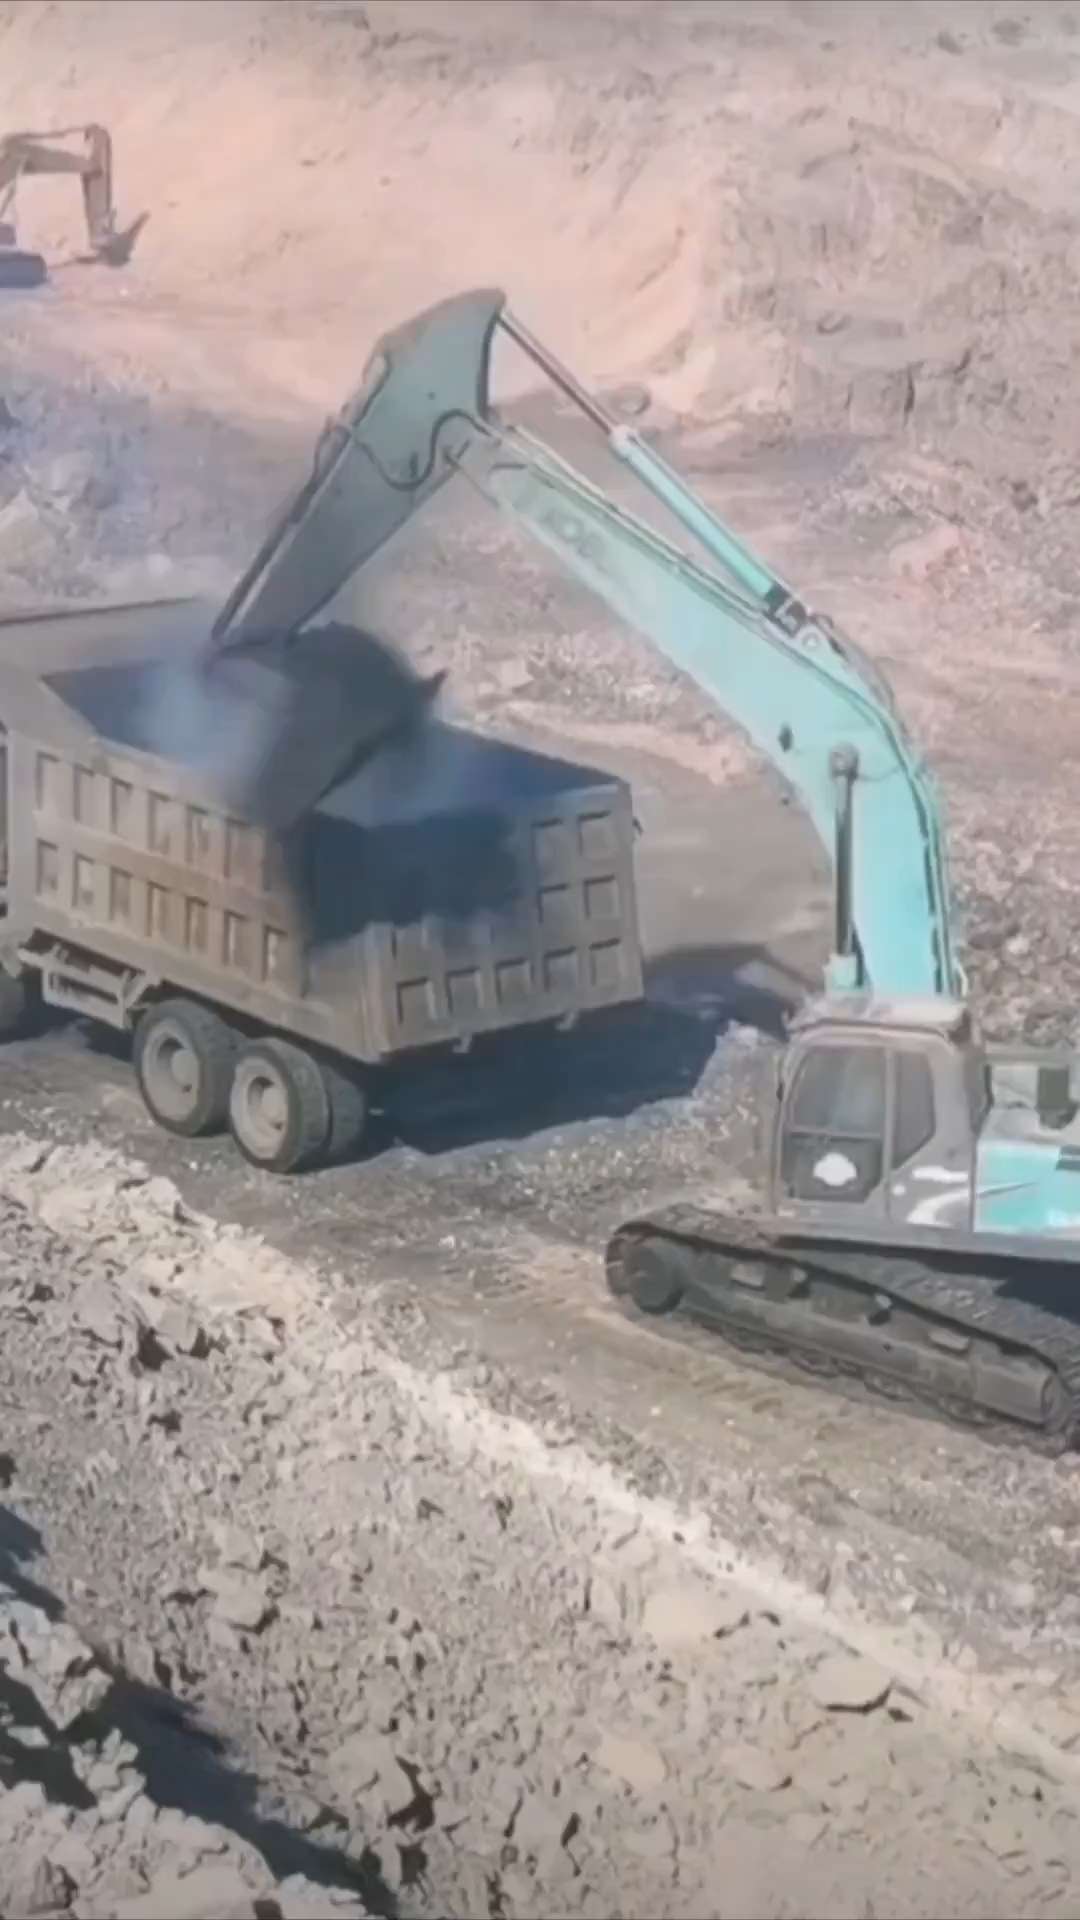 The coal truck is on fire